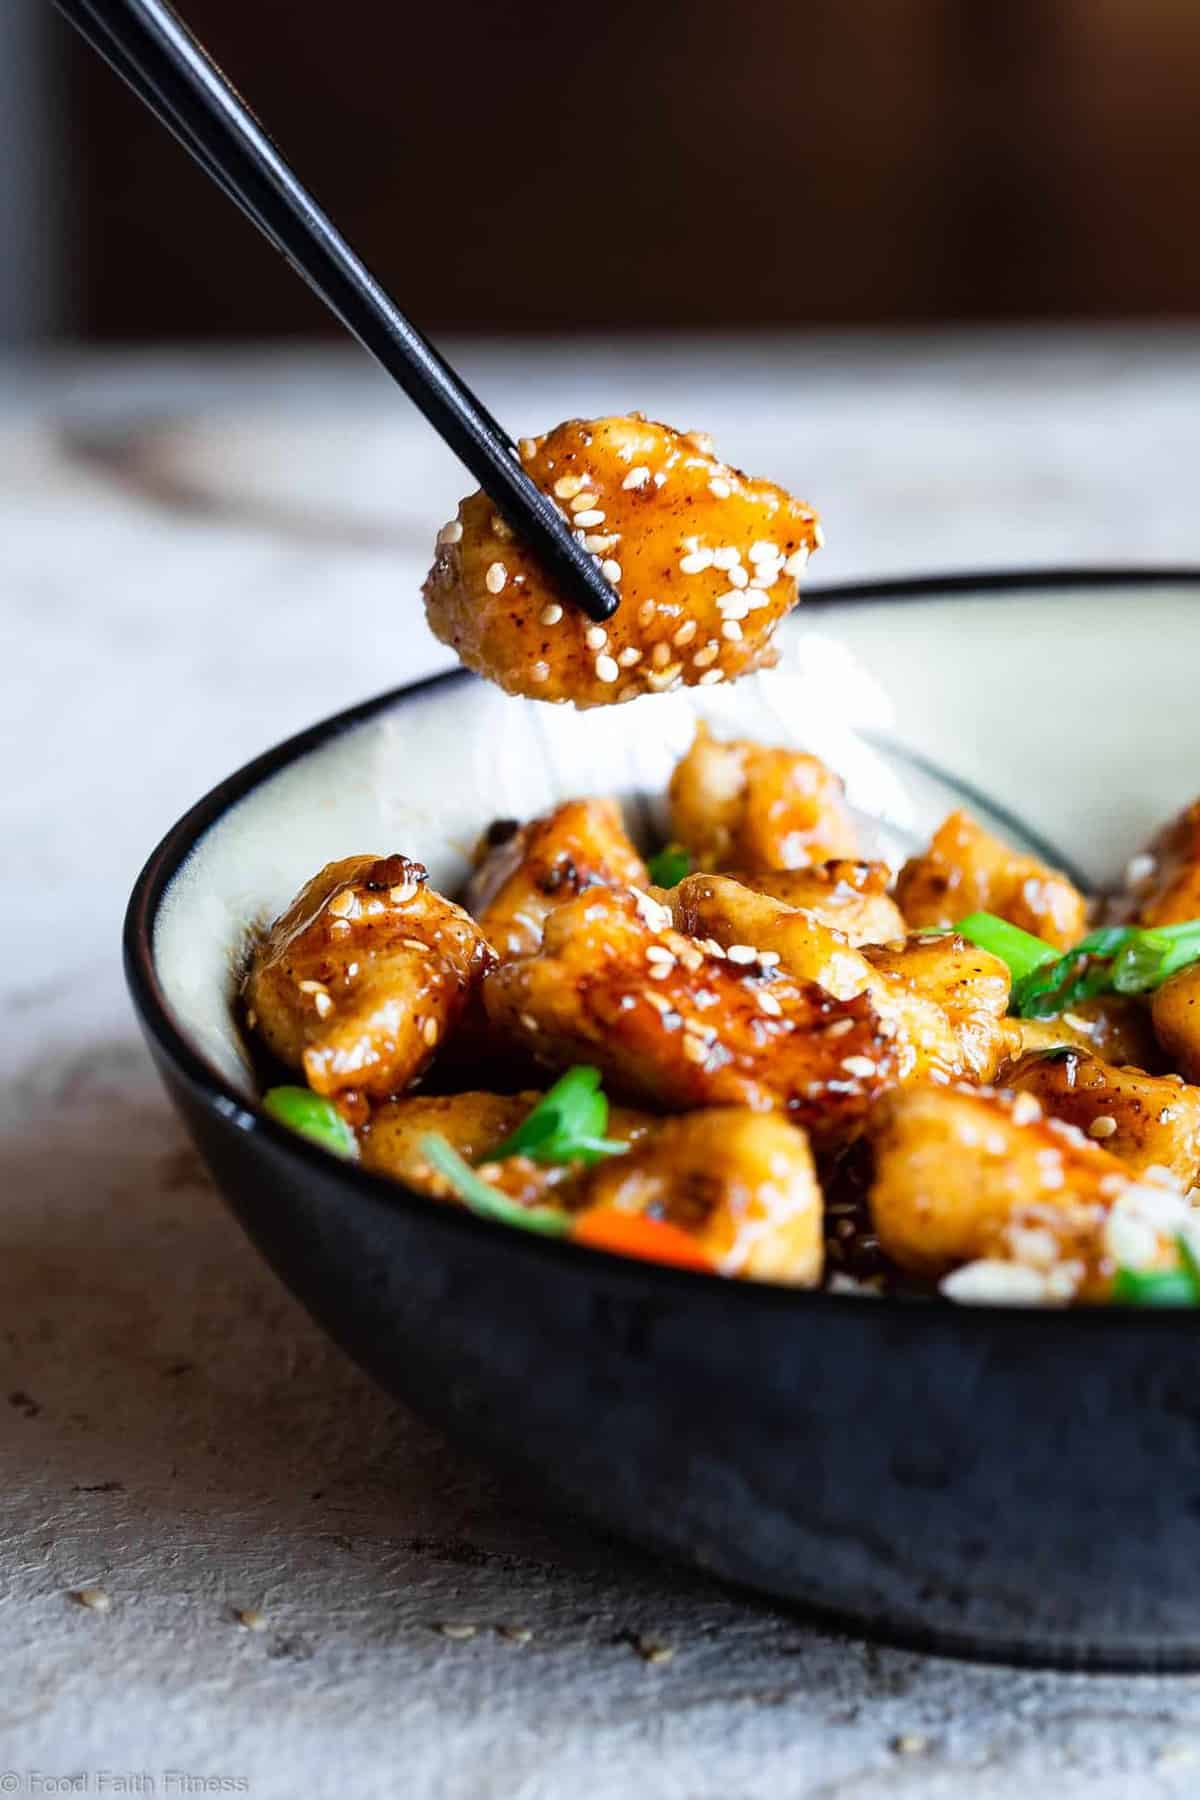 Easy Whole30 Sesame Chicken -Â This paleo friendly, and sugar/grain/dairy and gluten freeÂ CRISPY Sesame Chicken tastes just like takeout but is SO much better for you! AÂ quick dinner that the whole family will love! | #Foodfaithfitness | #Glutenfree #Paleo #Whole30 #Sugarfree #Healthy